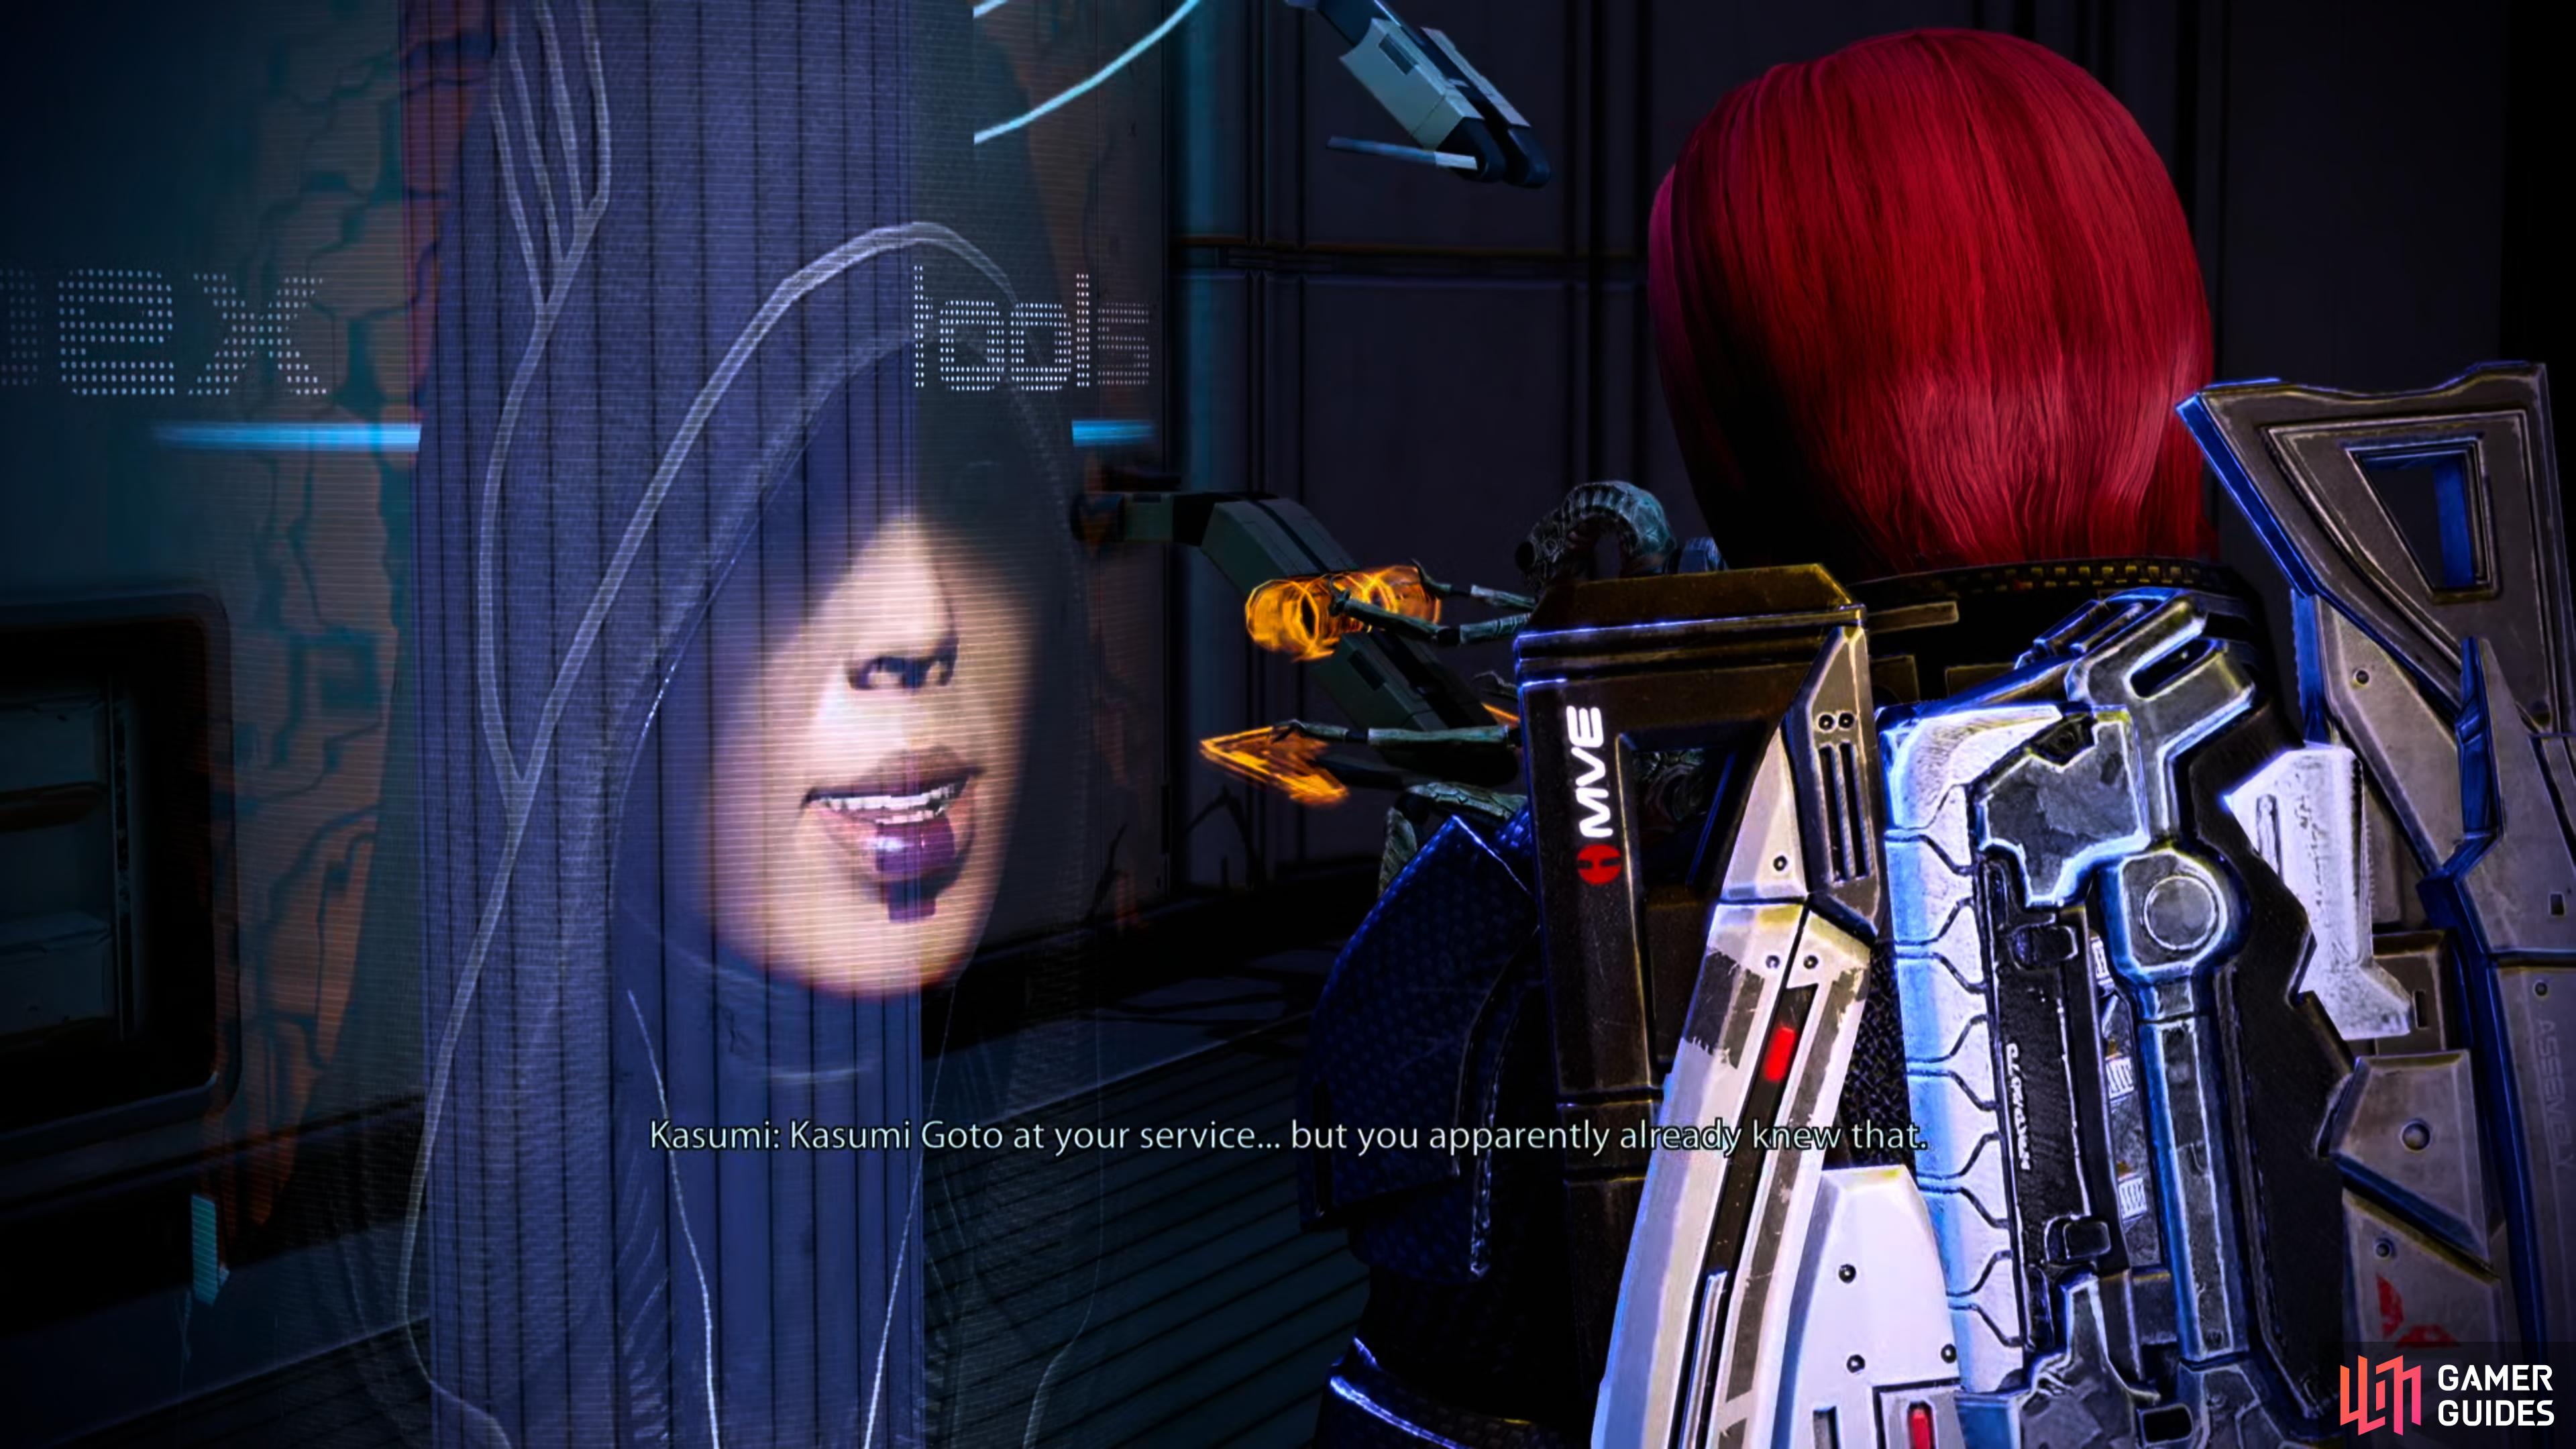 You can find Kasumi close to where you enter the Citadel.